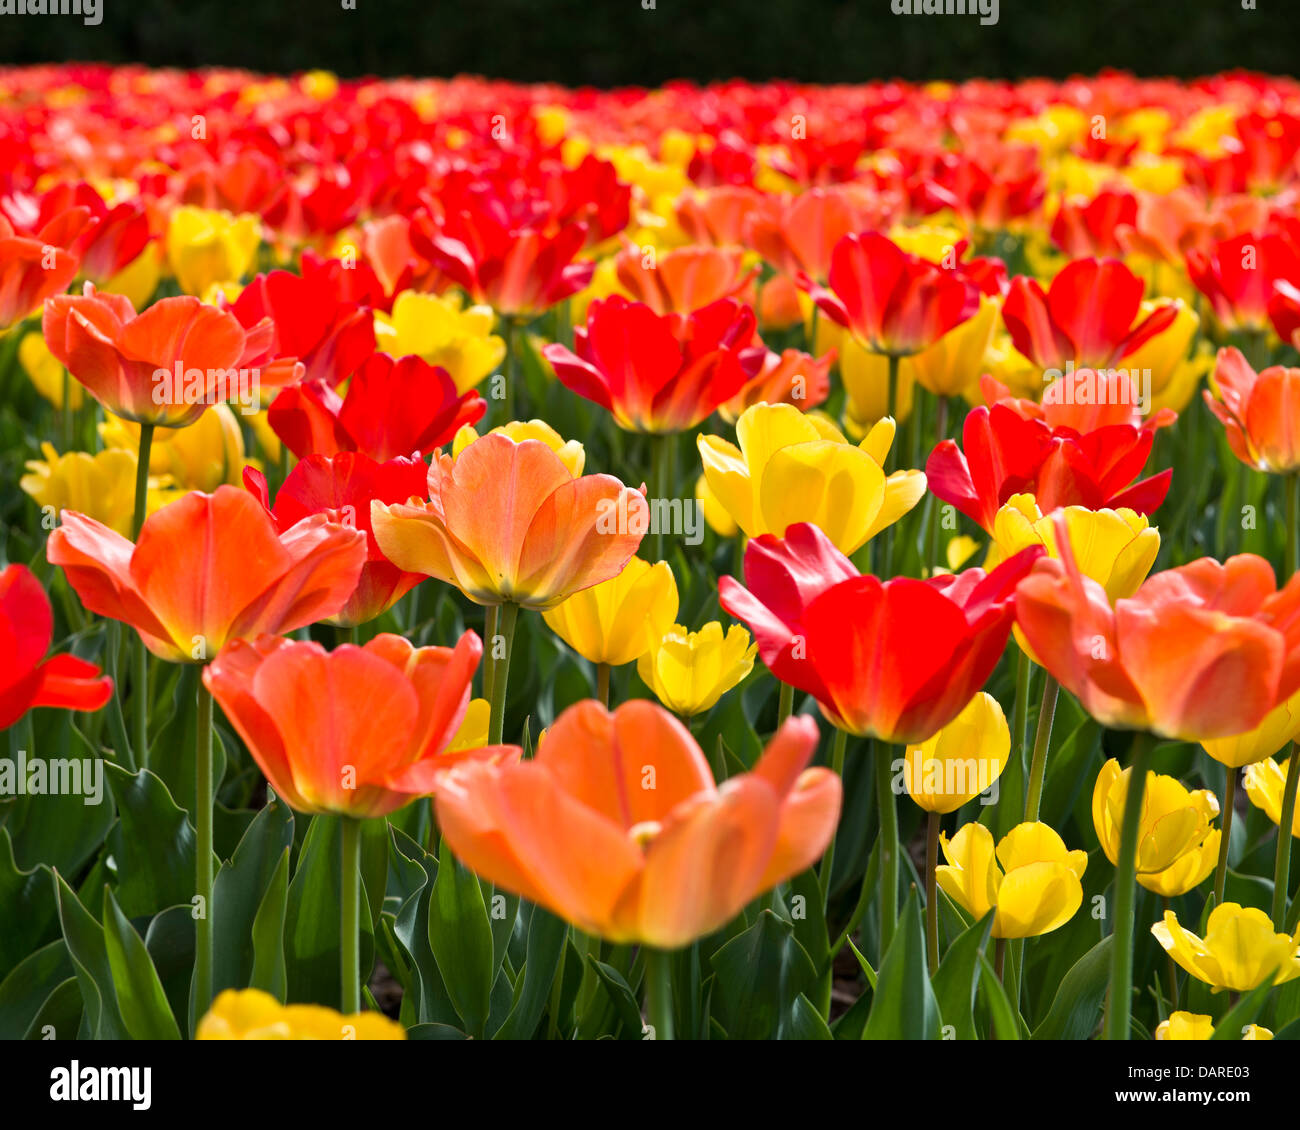 Colorful spring tulips in red, orange and yellow . Stock Photo